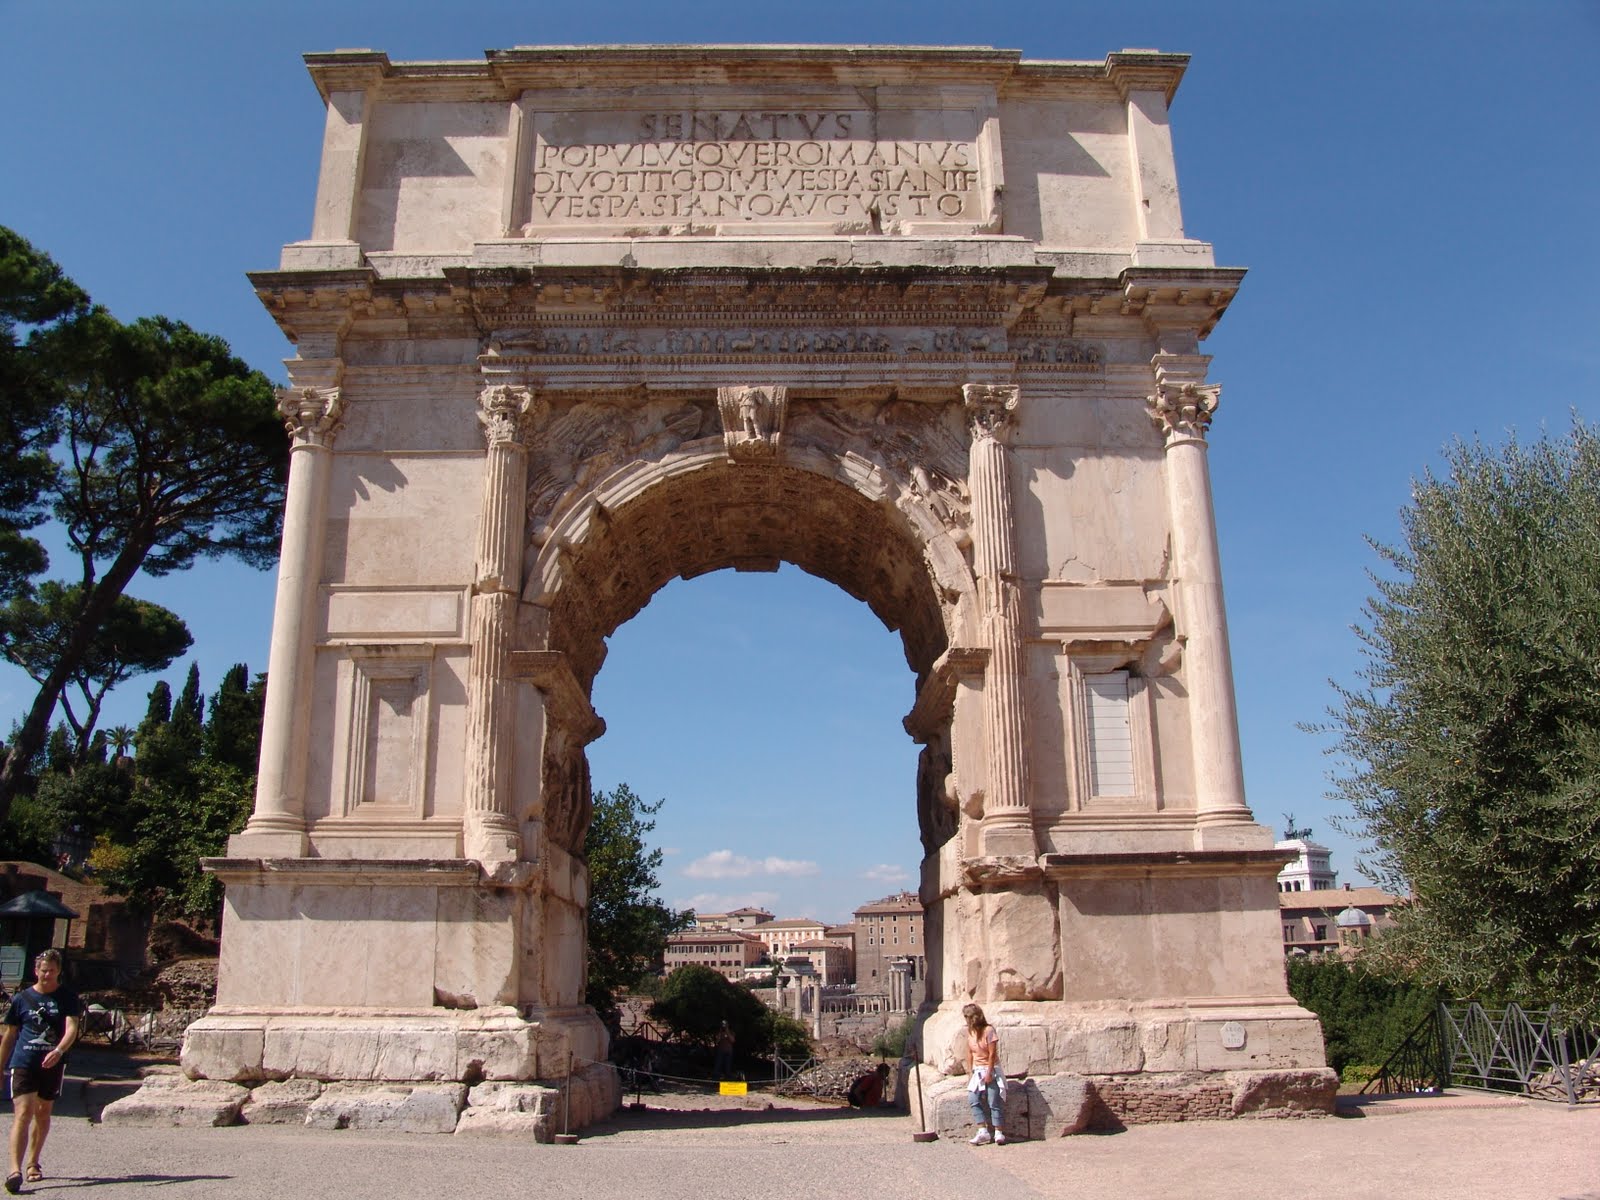 Arch of Titus, Rome, ca. 81 CE, marble